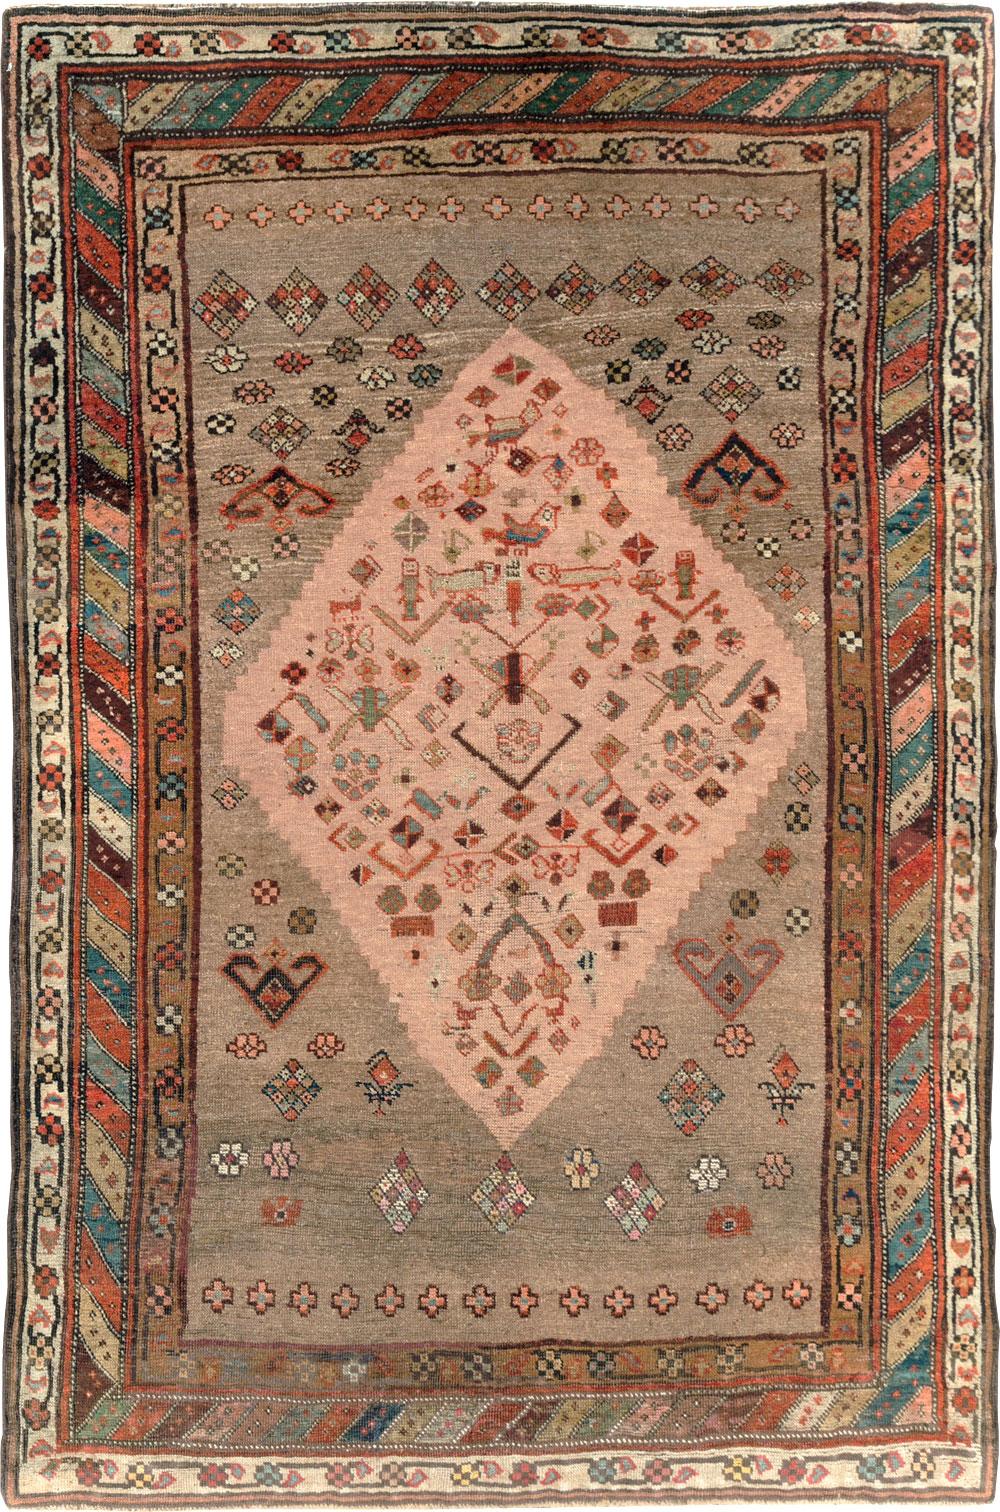 An early 20th-century Persian Kurd Tribal accent size rug.

Measures: 5' x 7'7'.